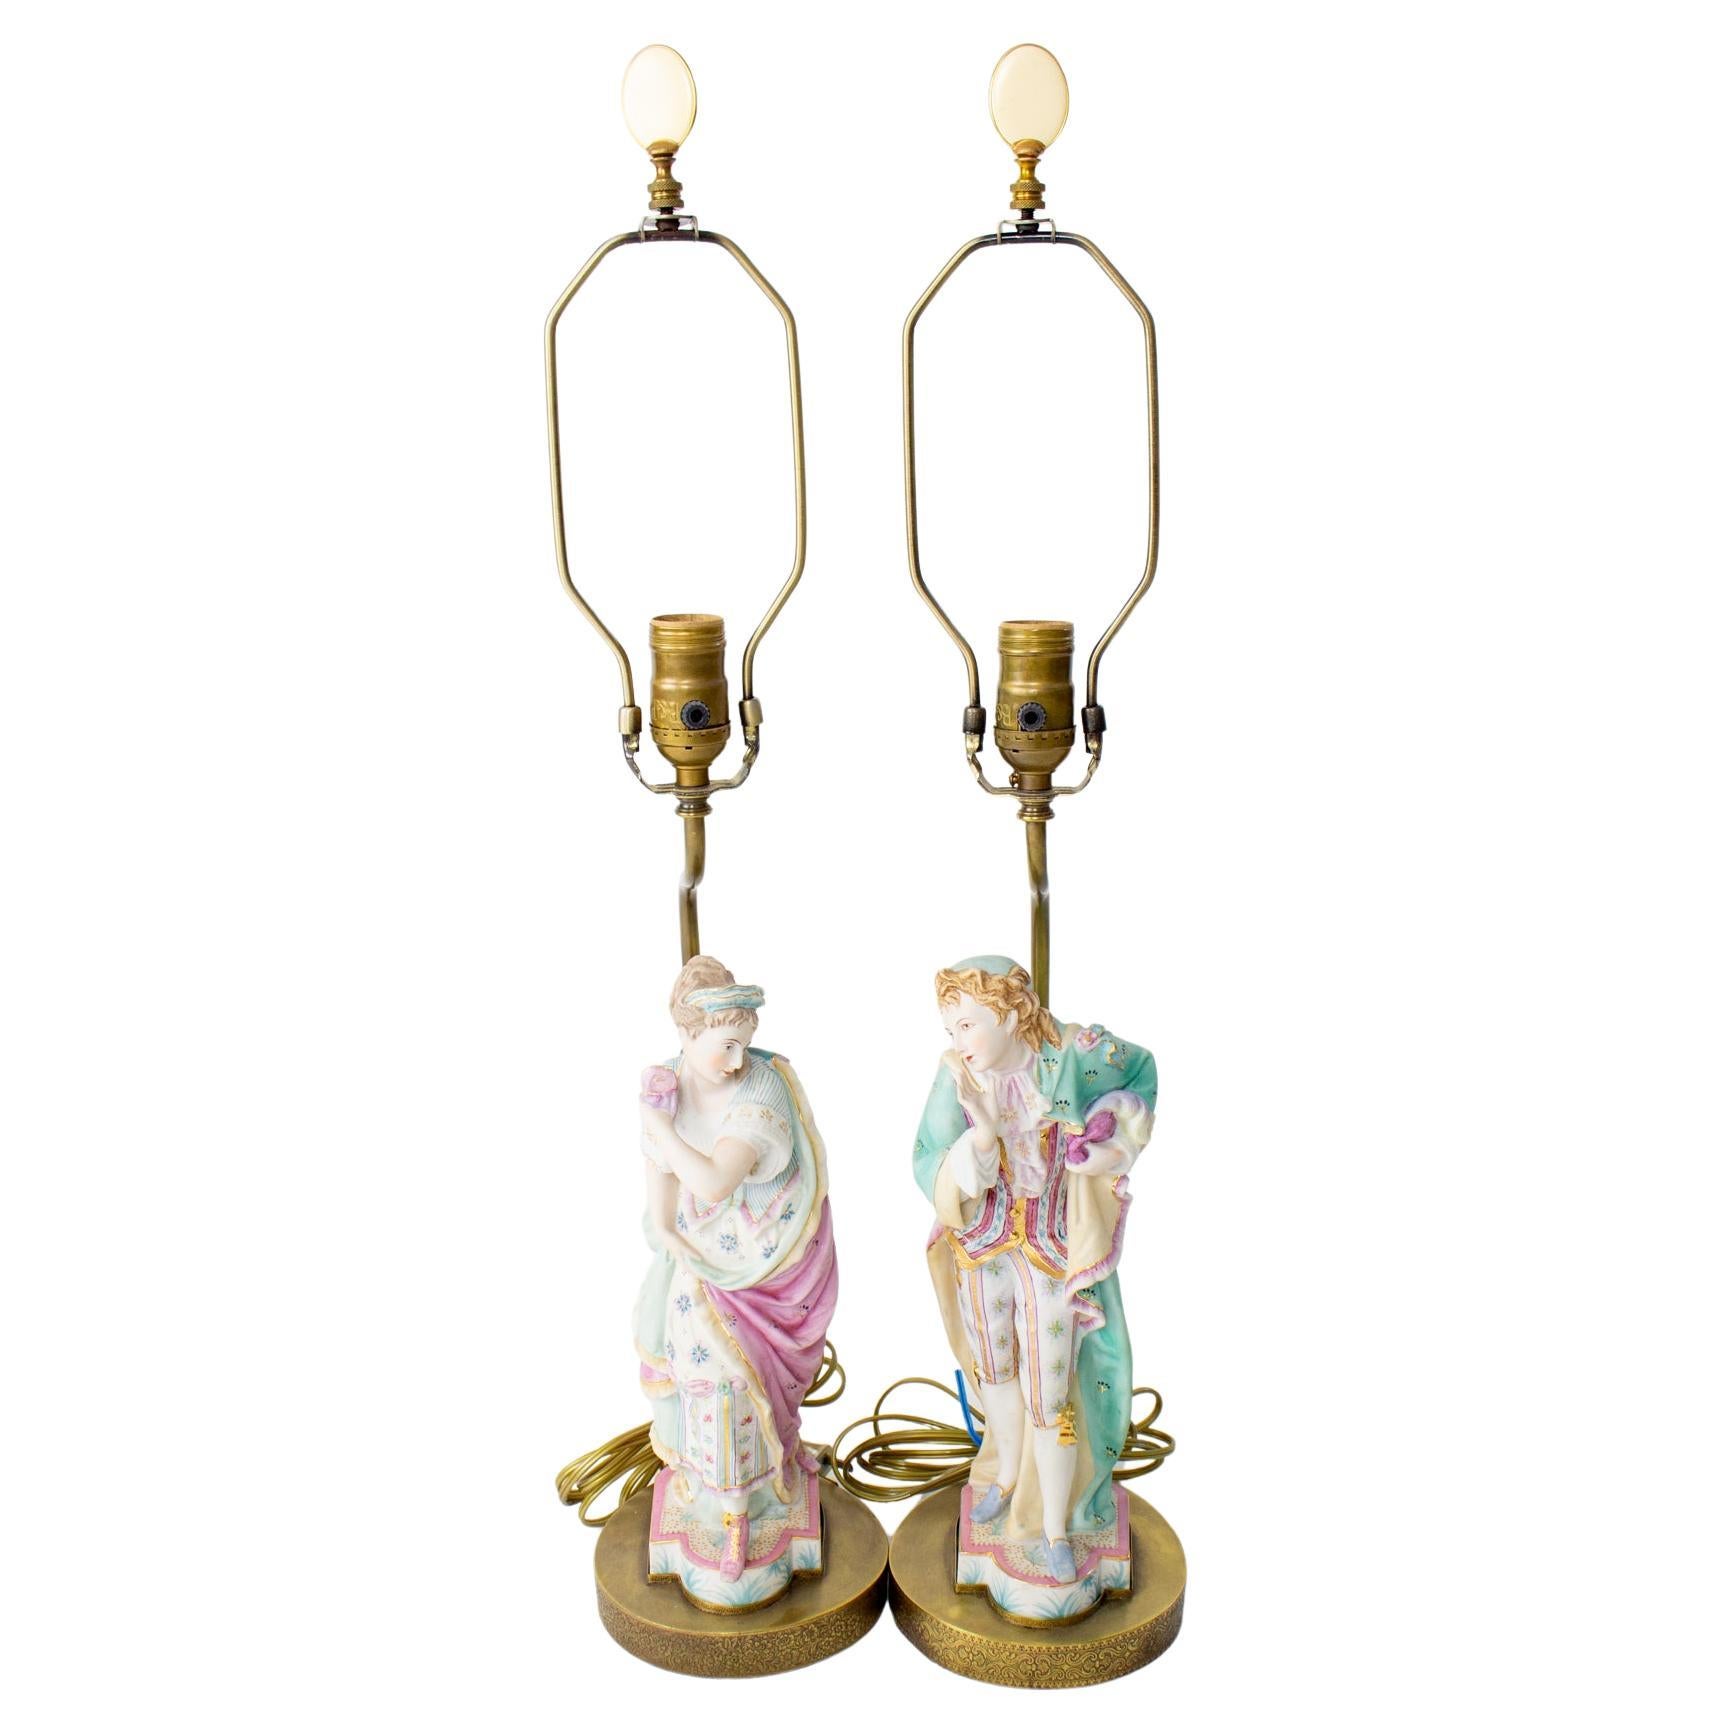 Mid 20th Century Masquerade Bisque Figurine Lamps - a Pair For Sale